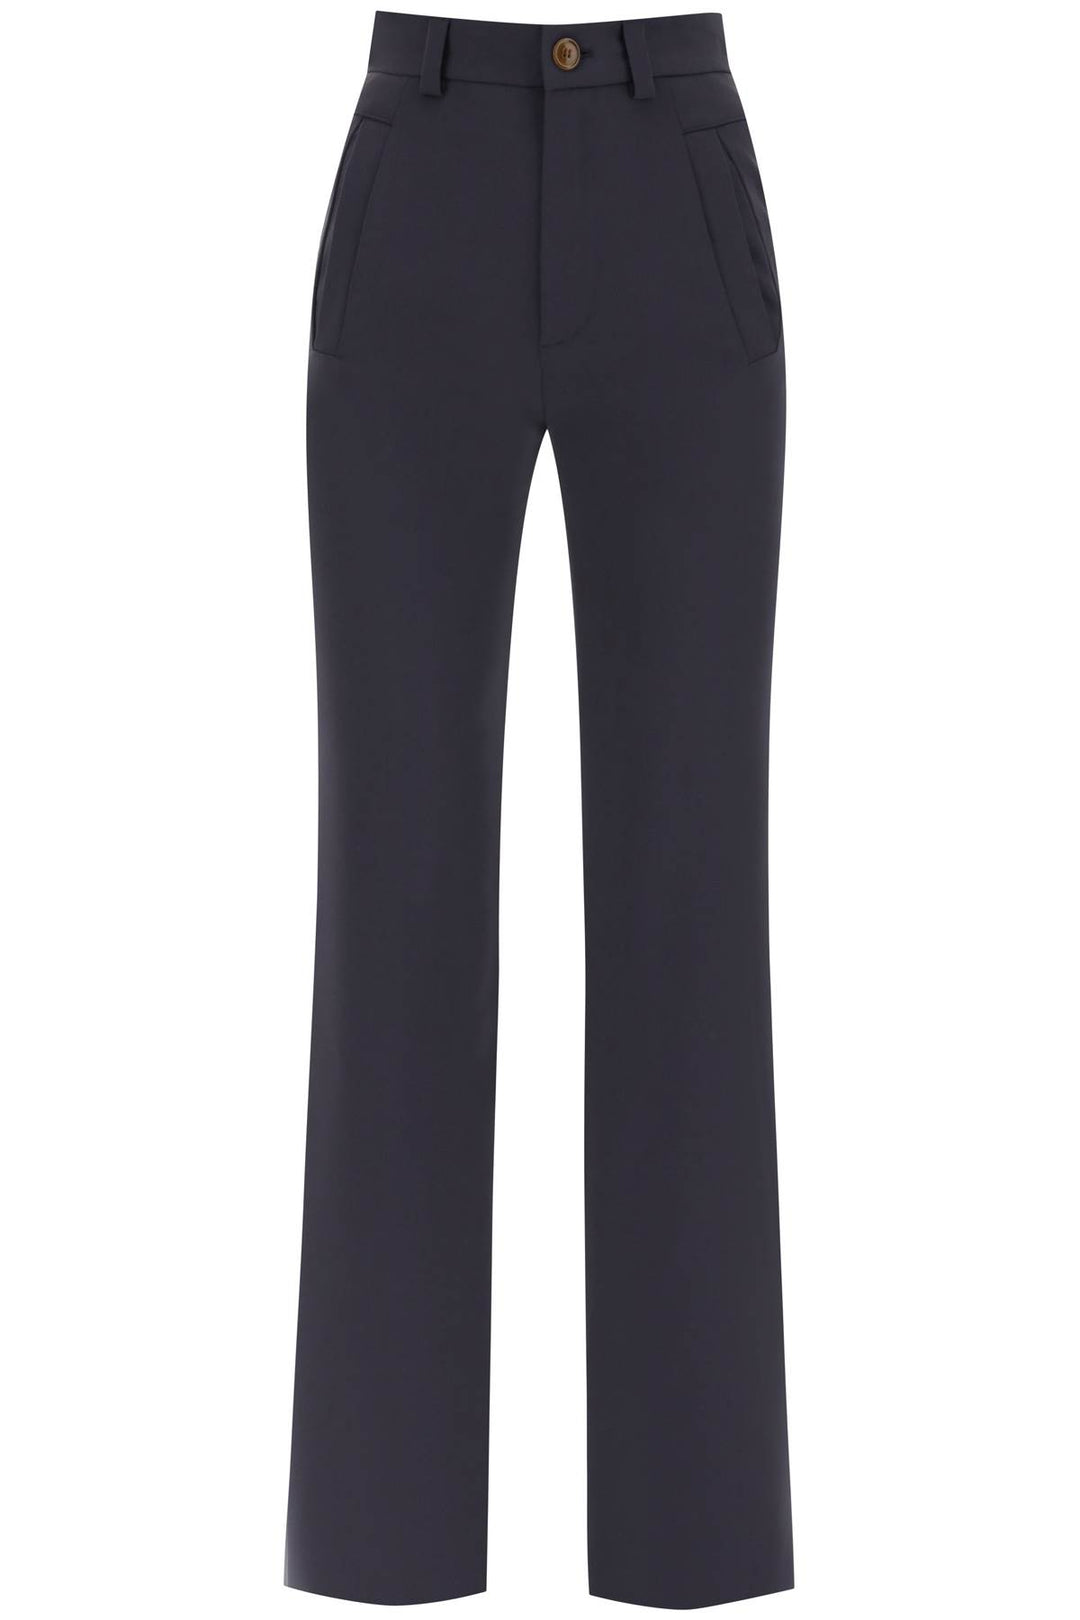 Vivienne westwood 'ray' trousers in recycled cady-0